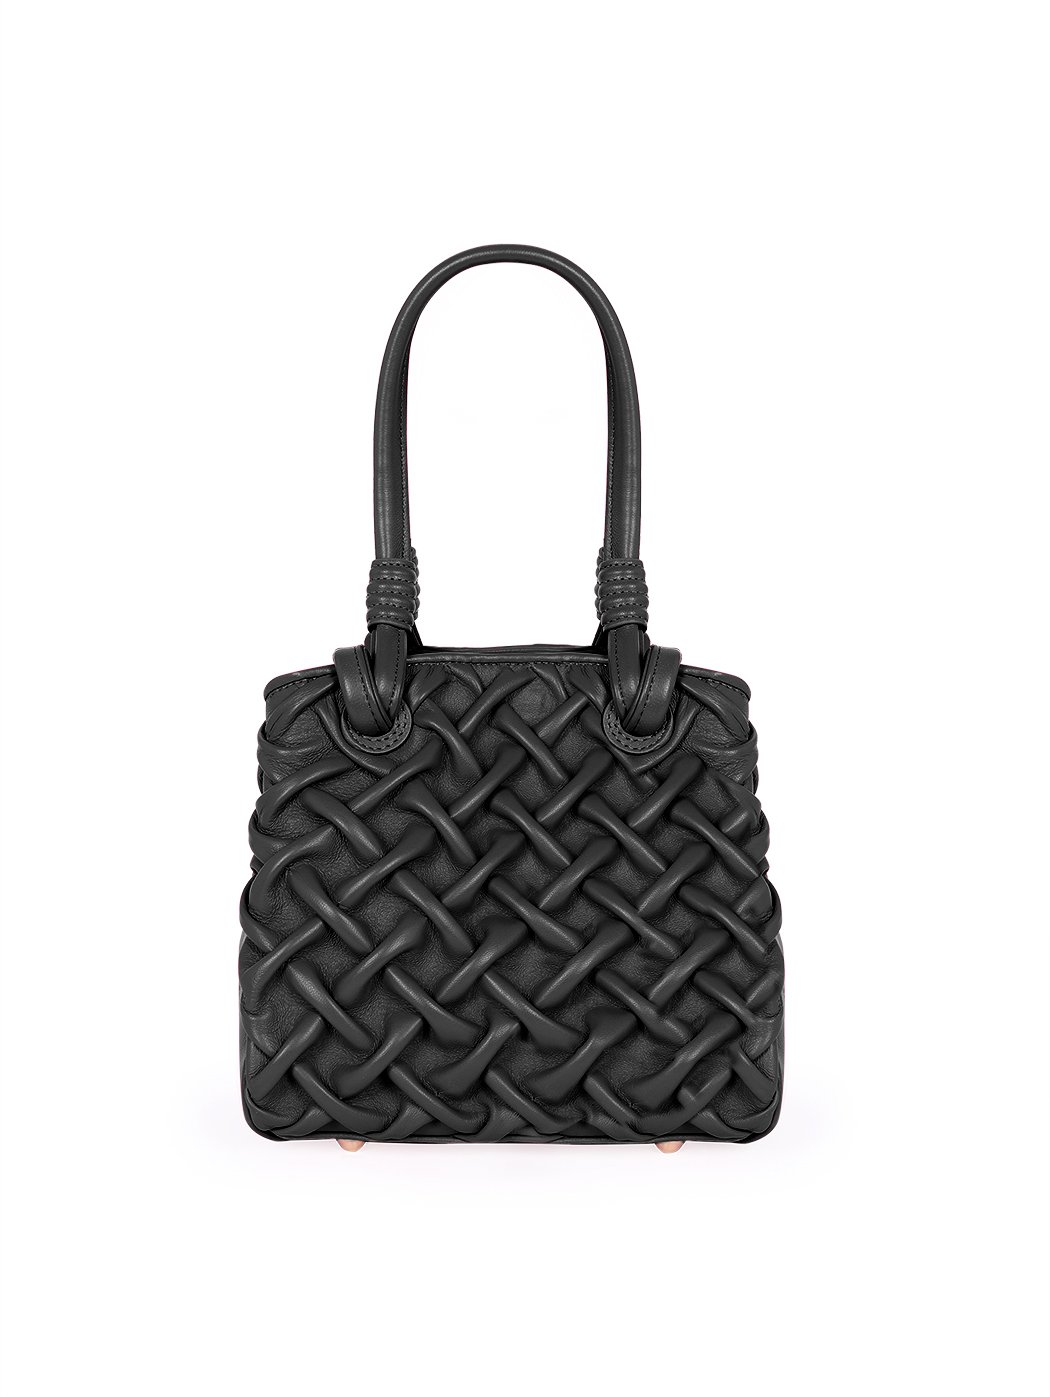 Top Handle Crossbody Quilted Weave Leather Purse Black